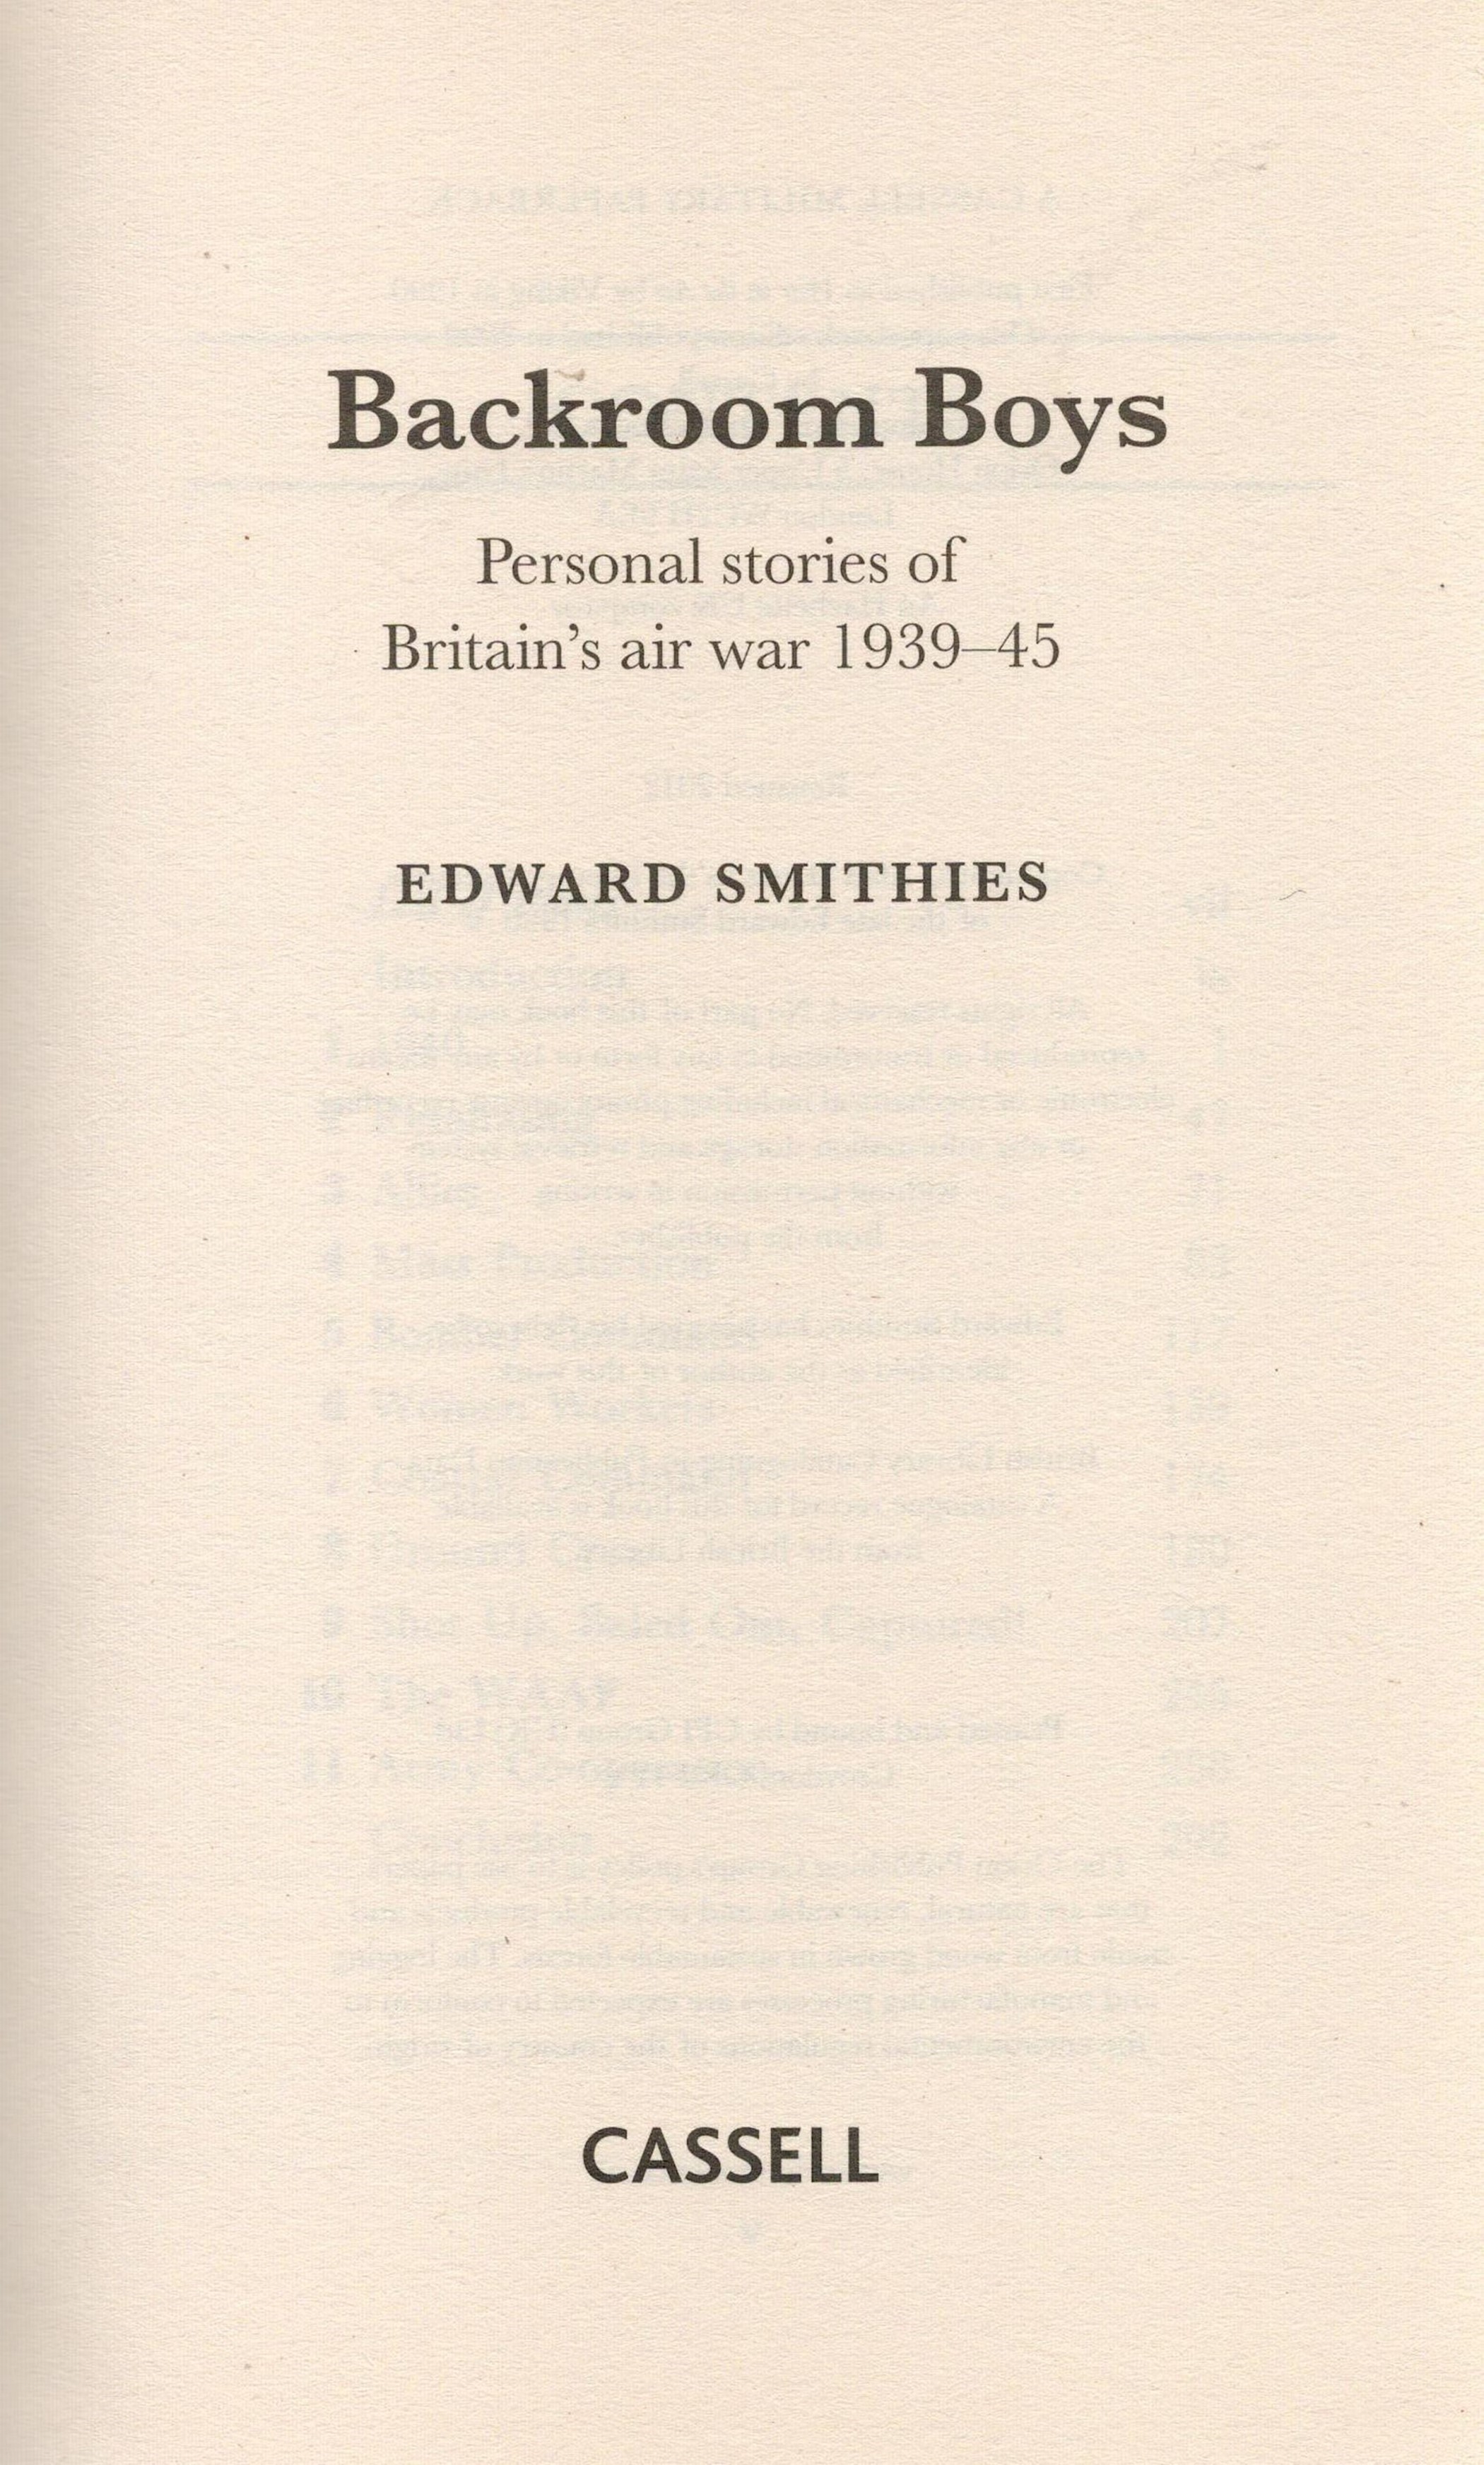 Backroom Boys Personal Stories of Britain's Air War by Edward Smithies Softback Book reissued 2012 - Image 6 of 9